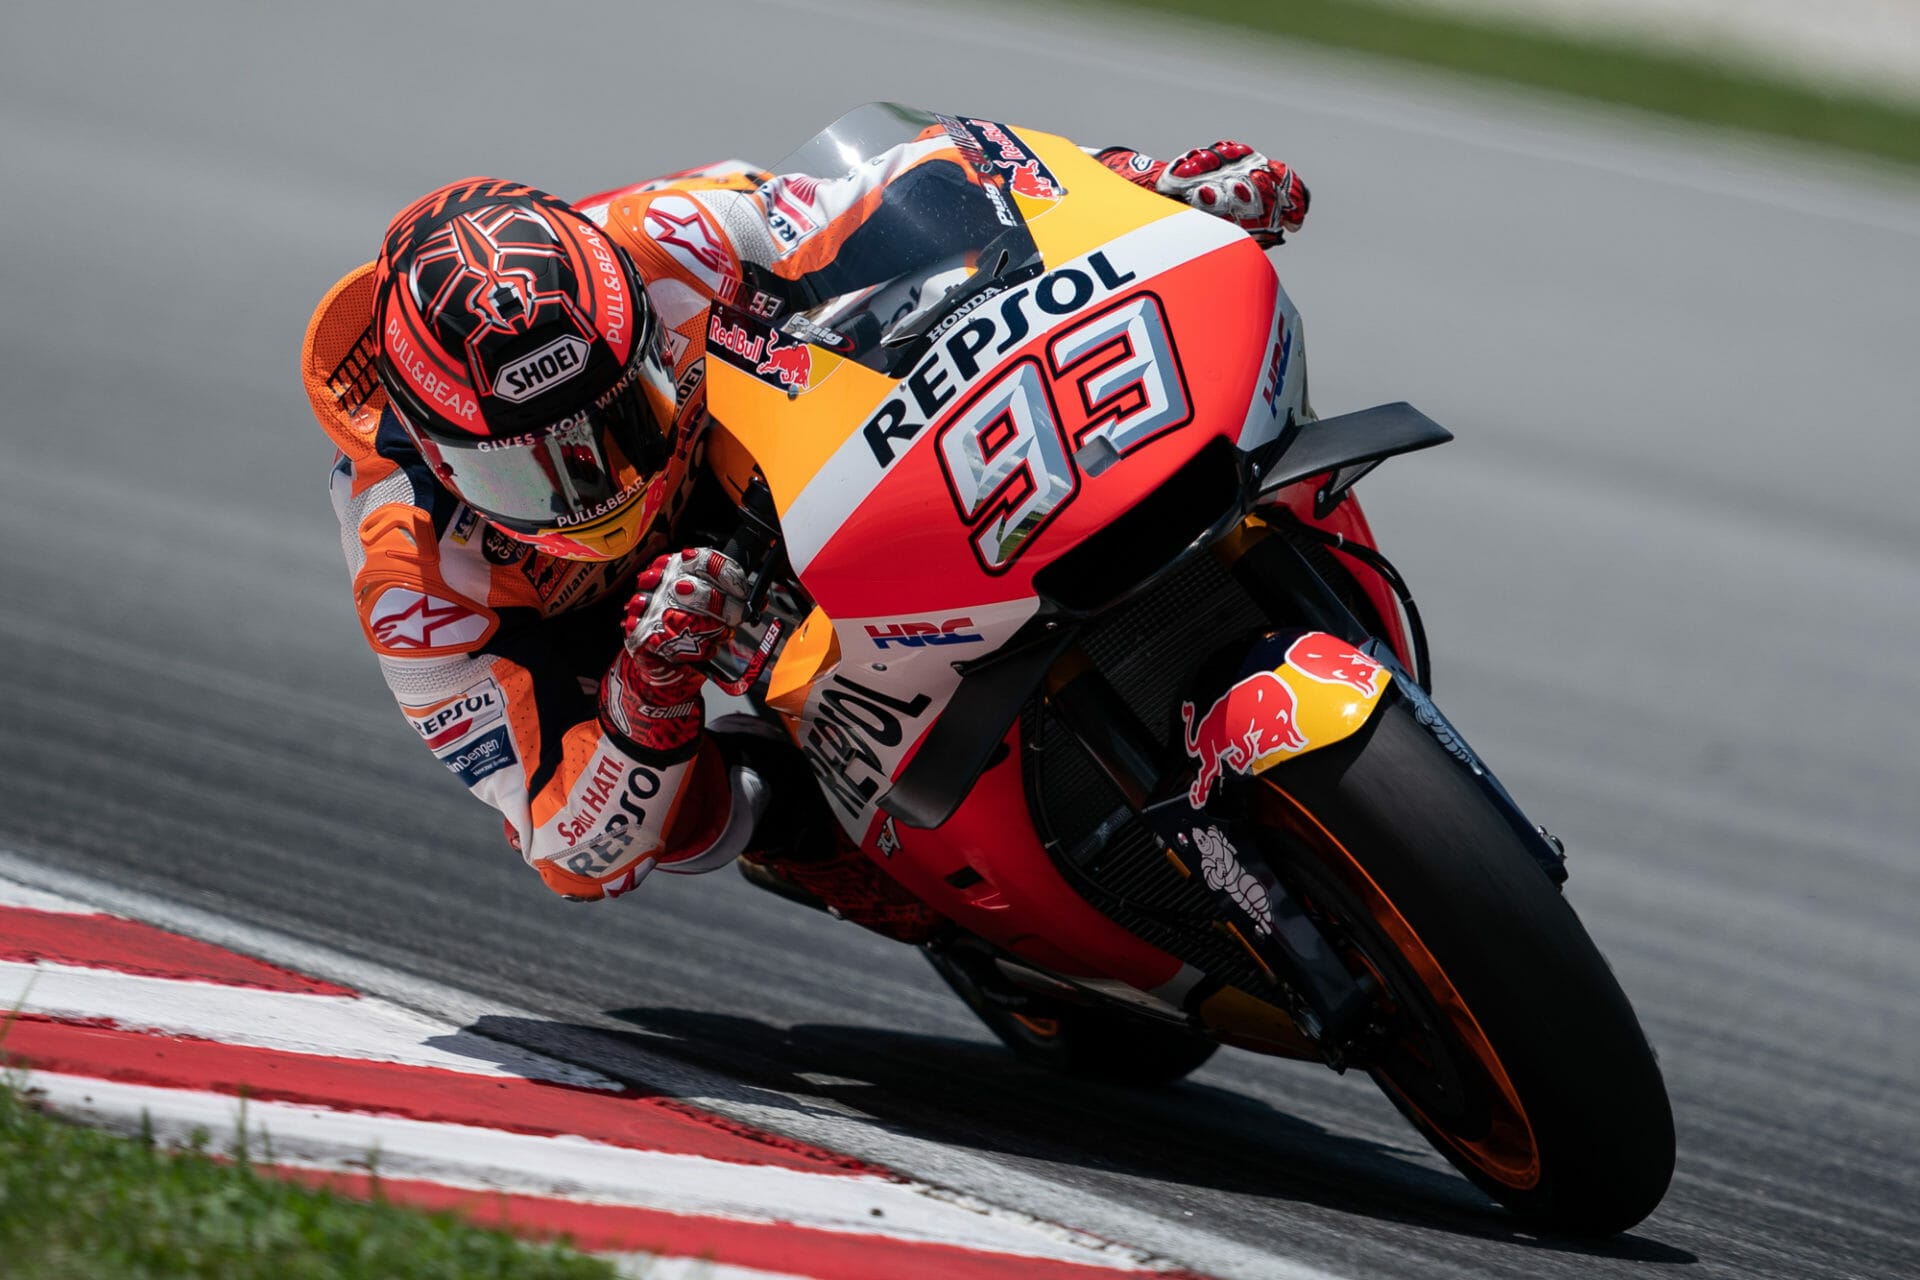 Marc Marquez has to cancel the race in Jerez
- also in the App MOTORCYCLE NEWS